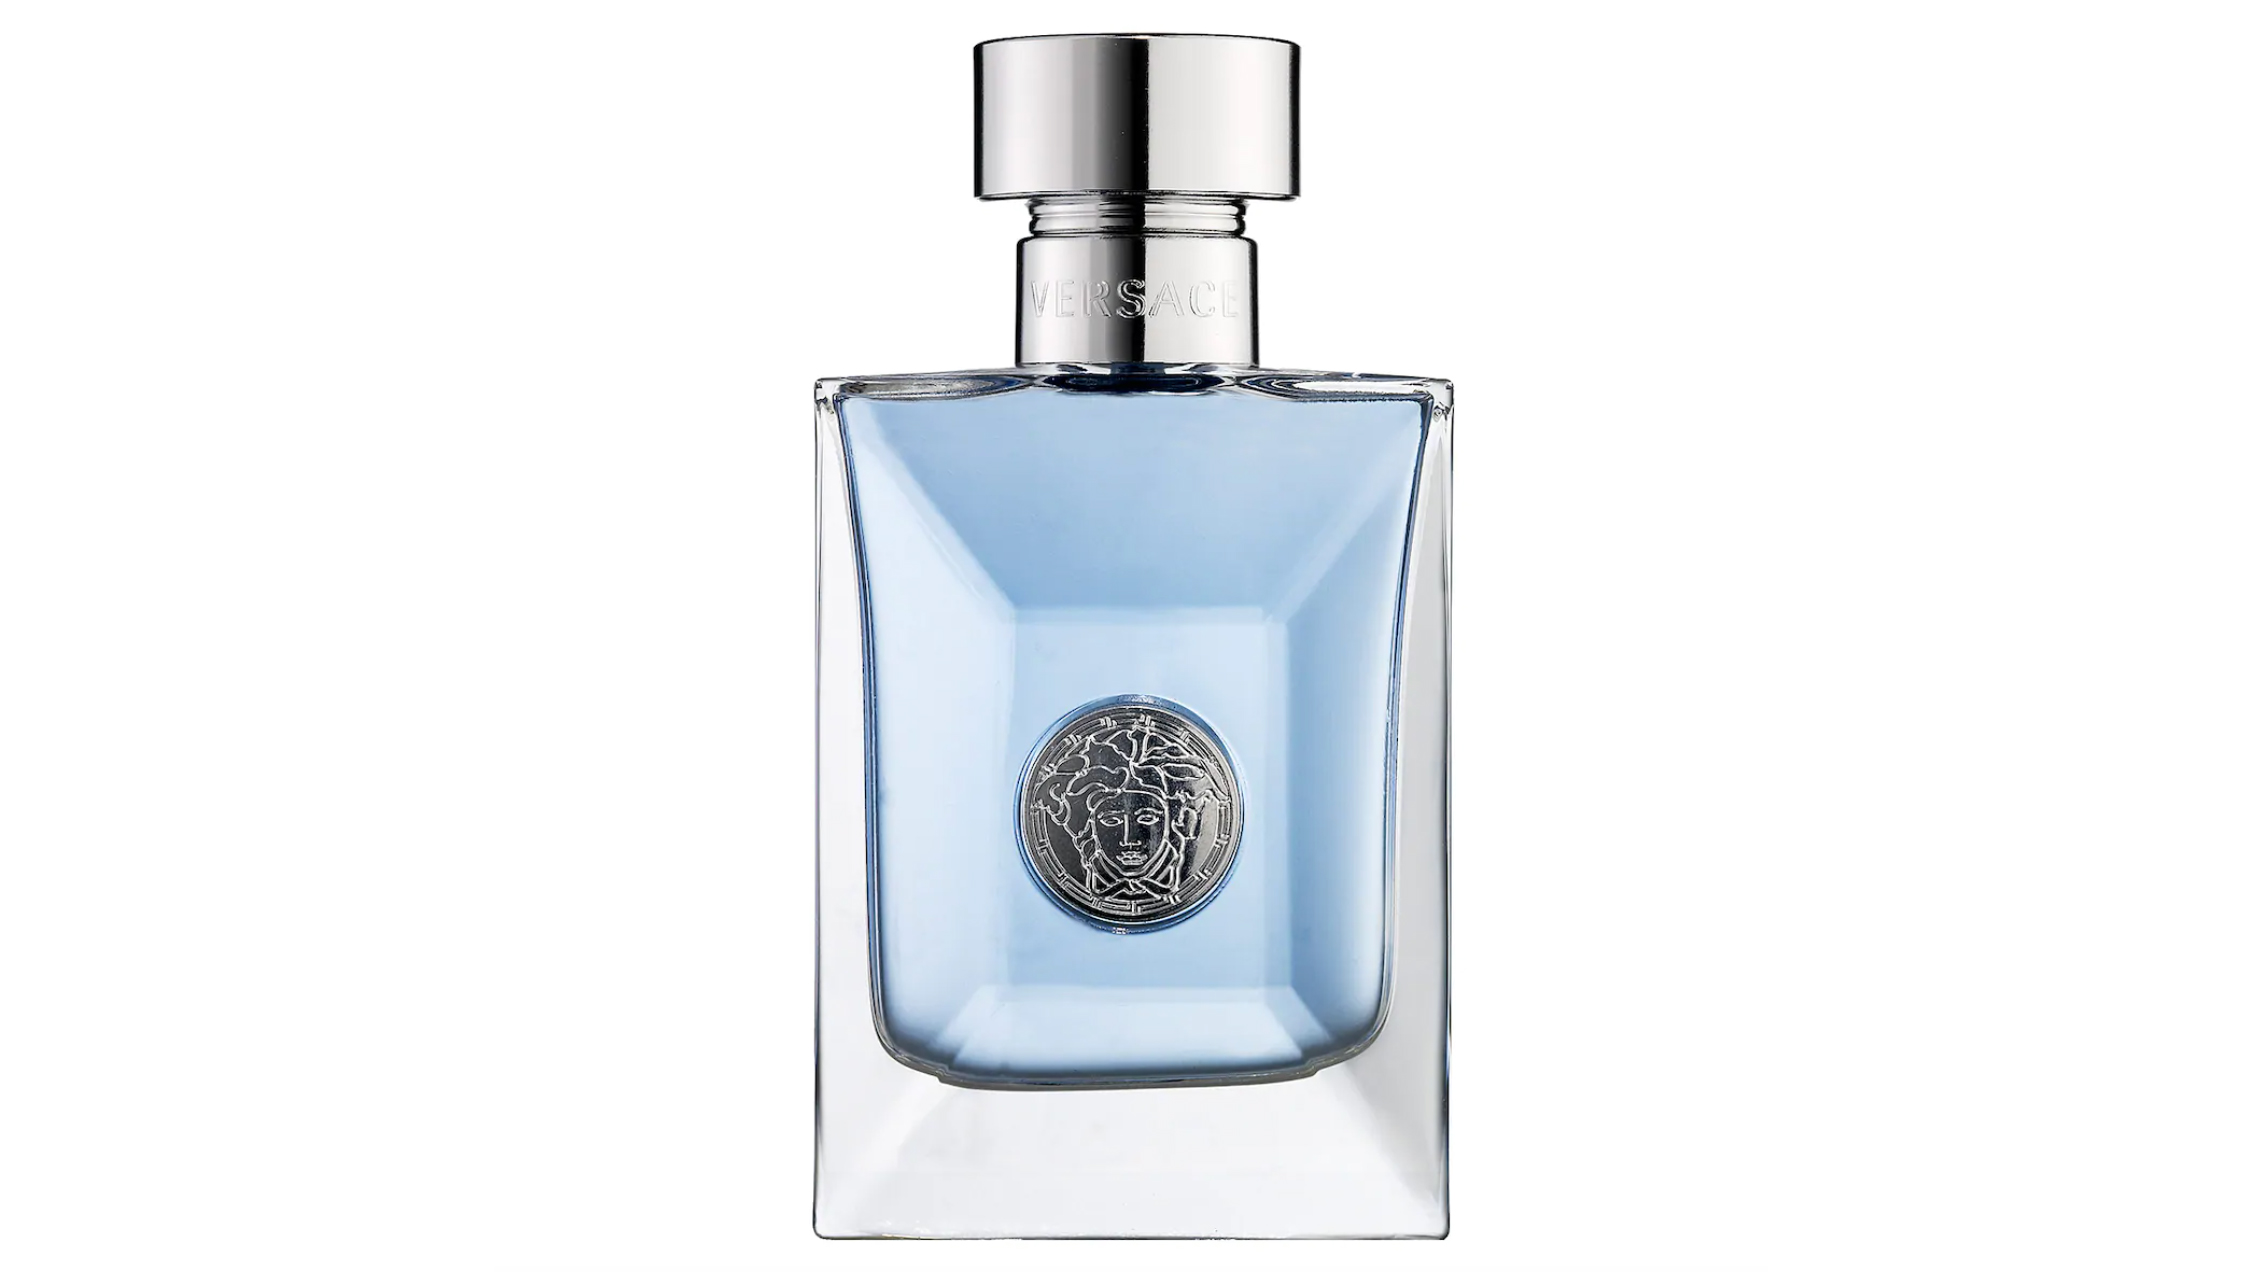 best selling versace cologne